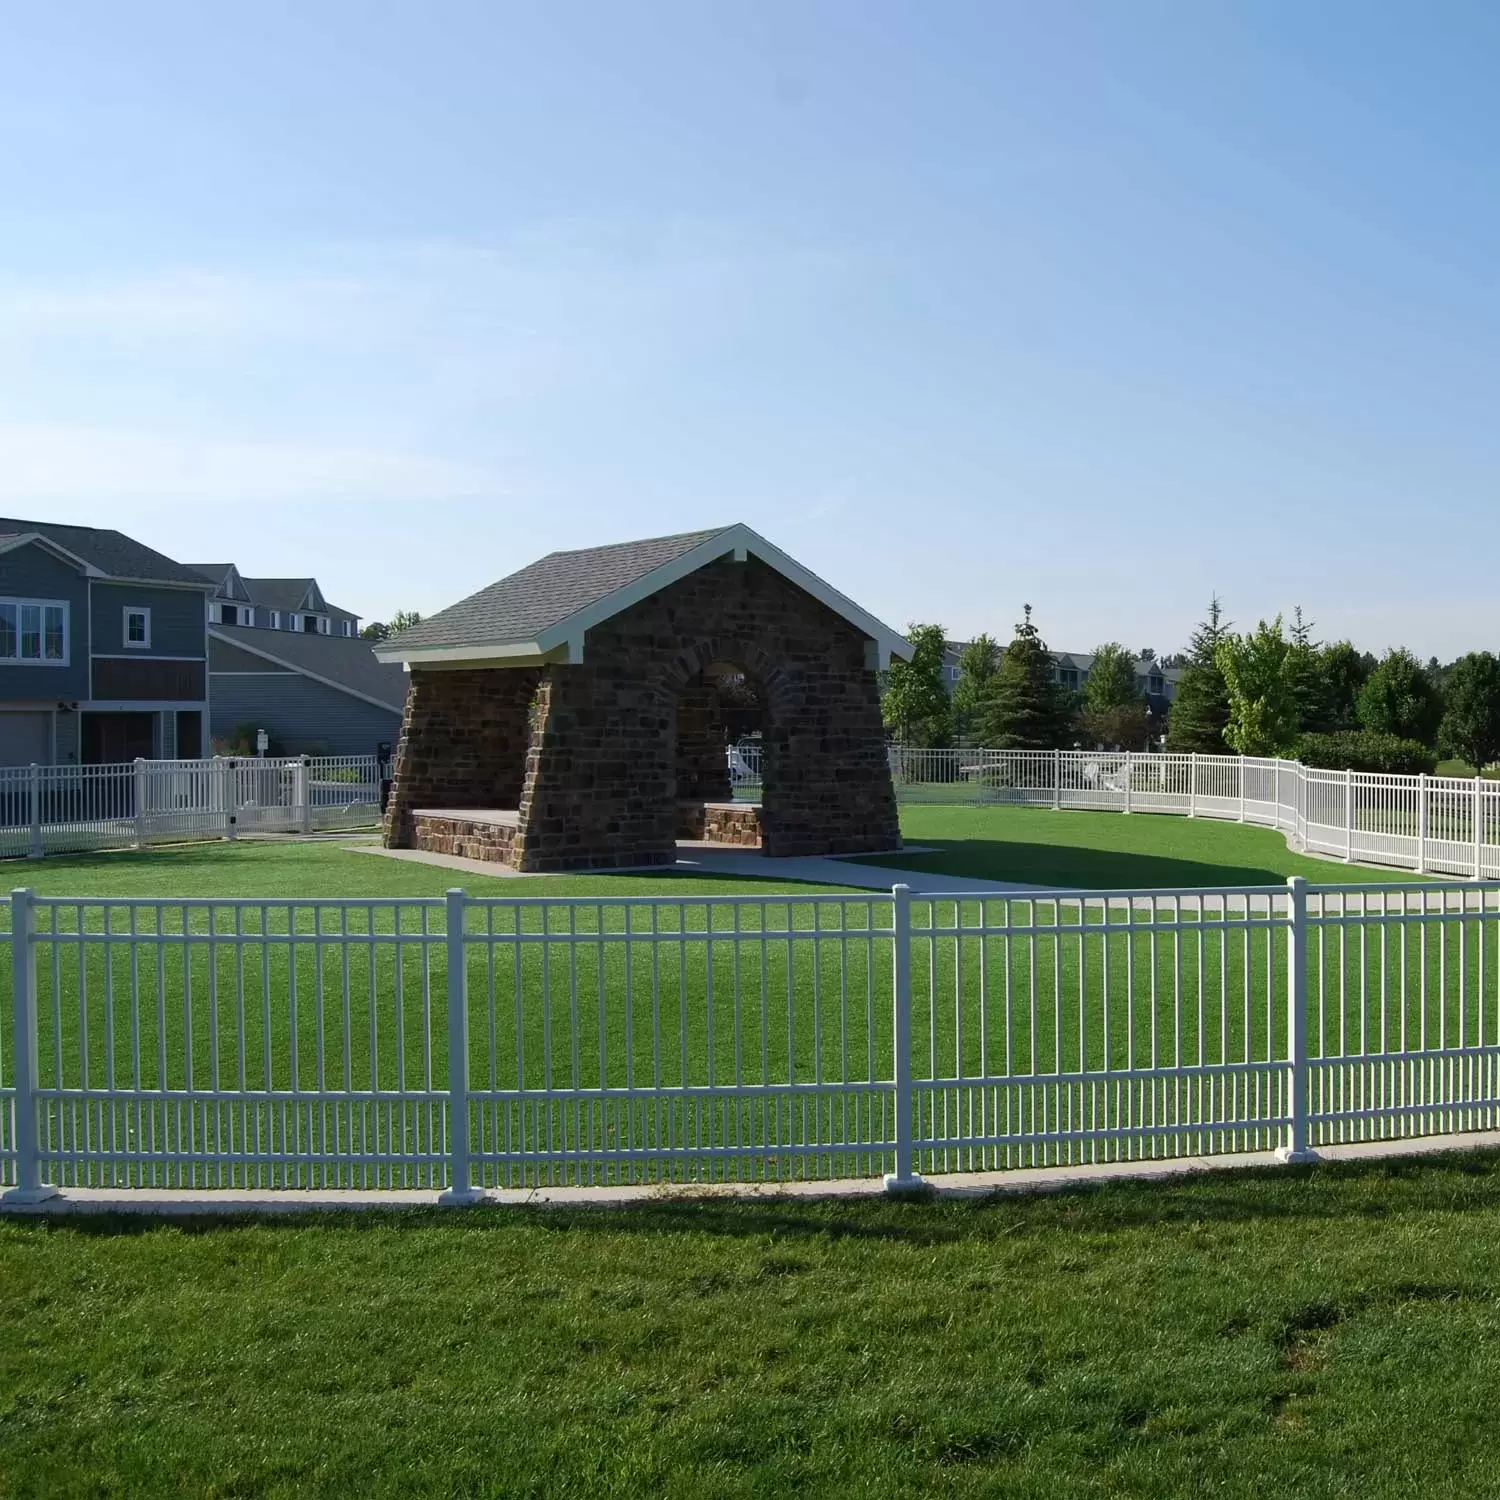 The Bark Park, a fenced grassy area with a covered patio.